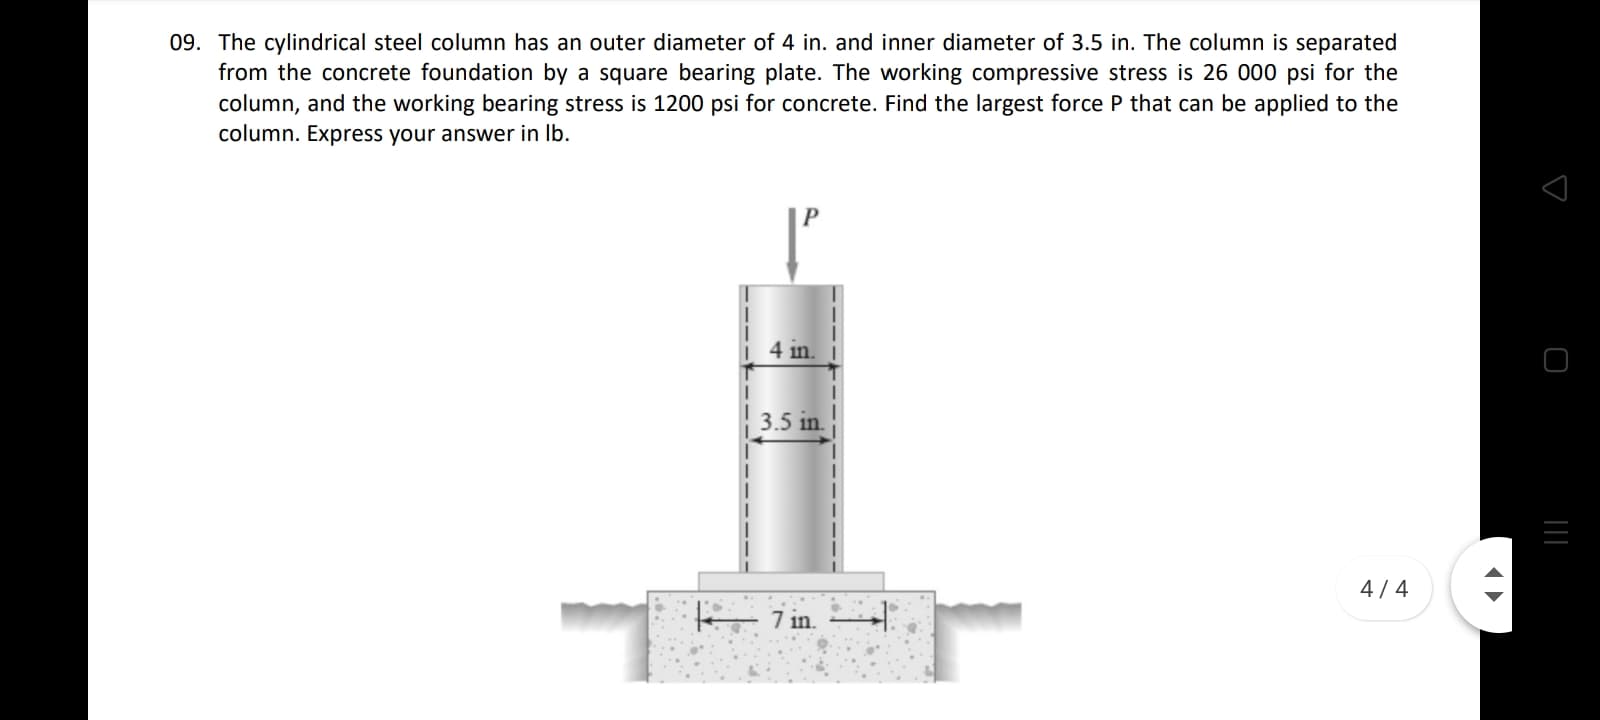 The cylindrical steel column has an outer diameter of 4 in. and inner diameter of 3.5 in. The column is separated
from the concrete foundation by a square bearing plate. The working compressive stress is 26 000 psi for the
column, and the working bearing stress is 1200 psi for concrete. Find the largest force P that can be applied to the
column. Express your answer in Ib.
4 in.
3.5 in.
4/4
7 in.
